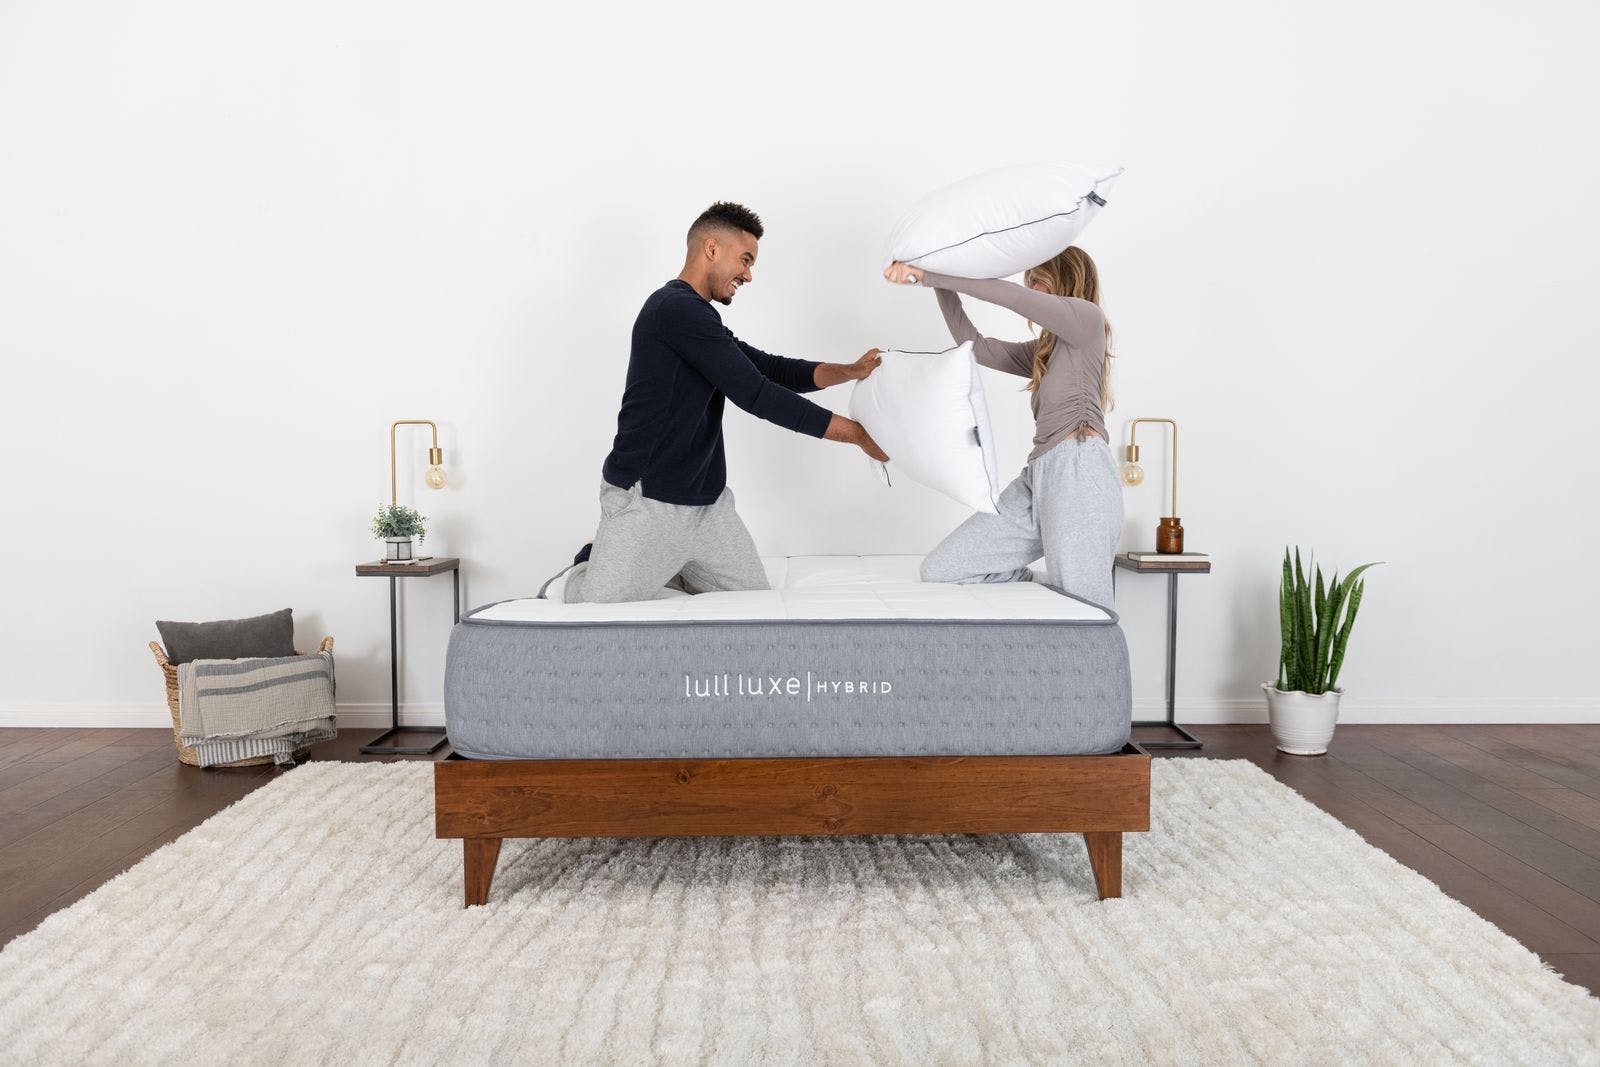 A couple smiling while having fun pillow fighting on top of a lull luxe mattress.